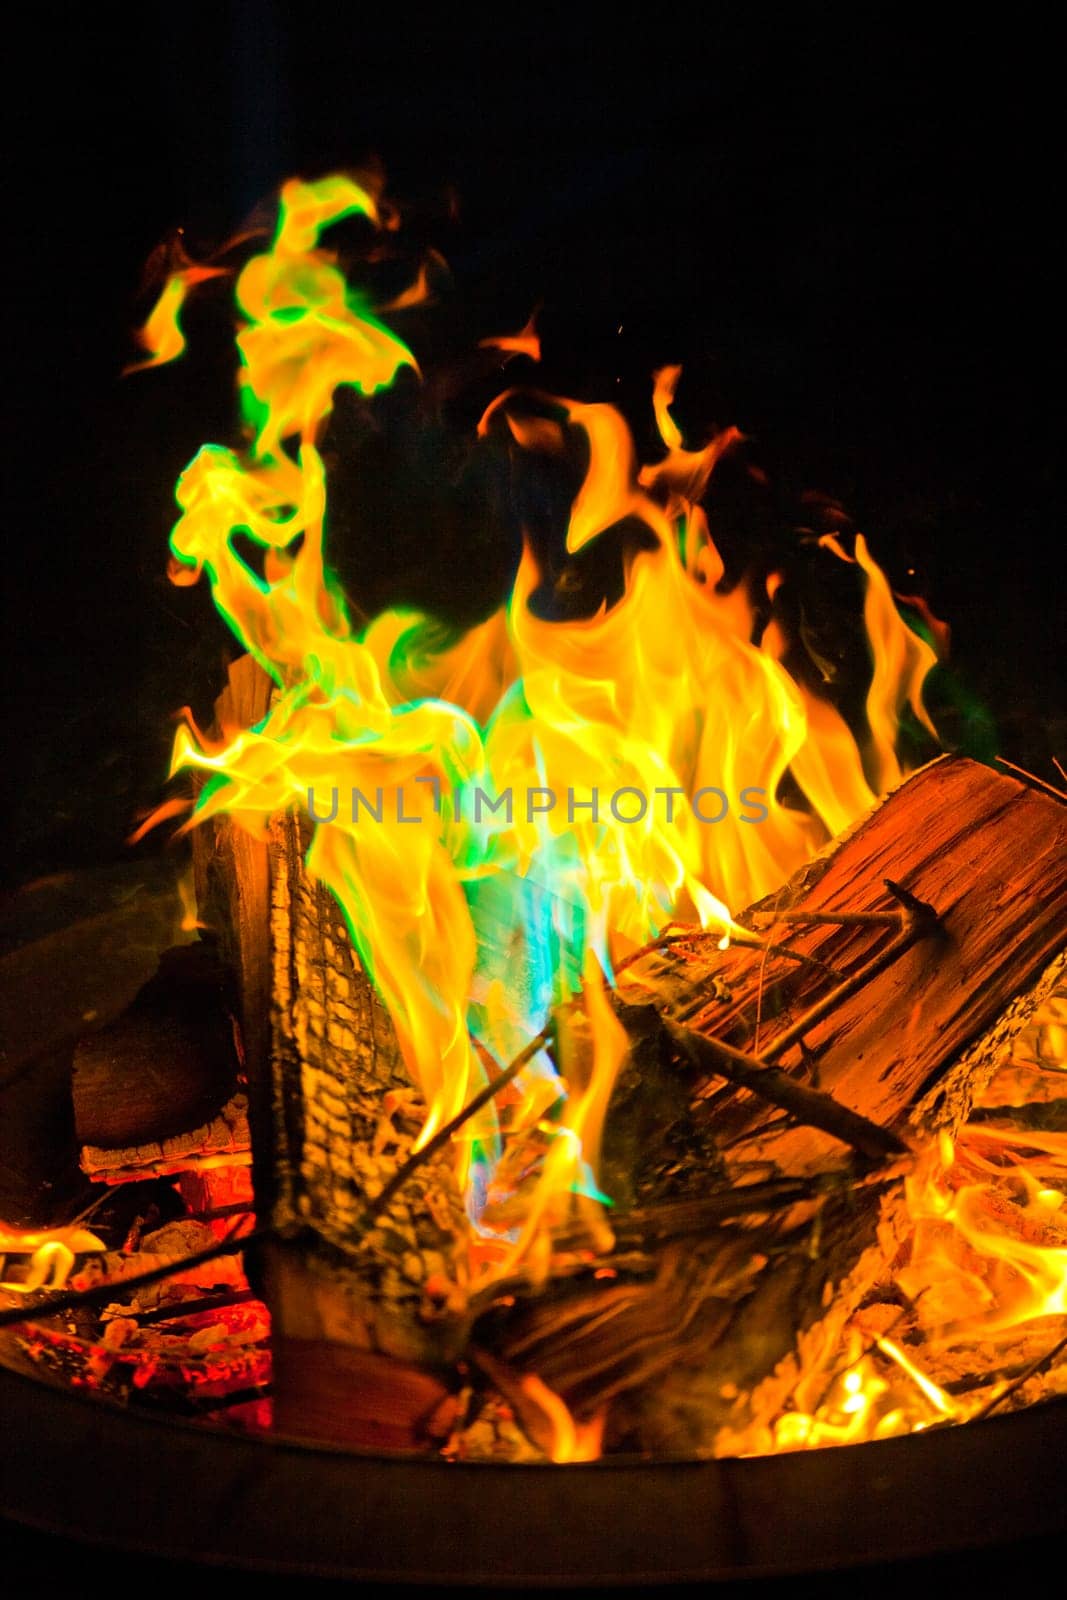 Captivating and Mystical: Experience the mesmerizing dance of vibrant flames in an outdoor fire pit in Fort Wayne, Indiana. The intense orange core radiates warmth and energy, while the flickering green flames add an unusual and mystical touch.